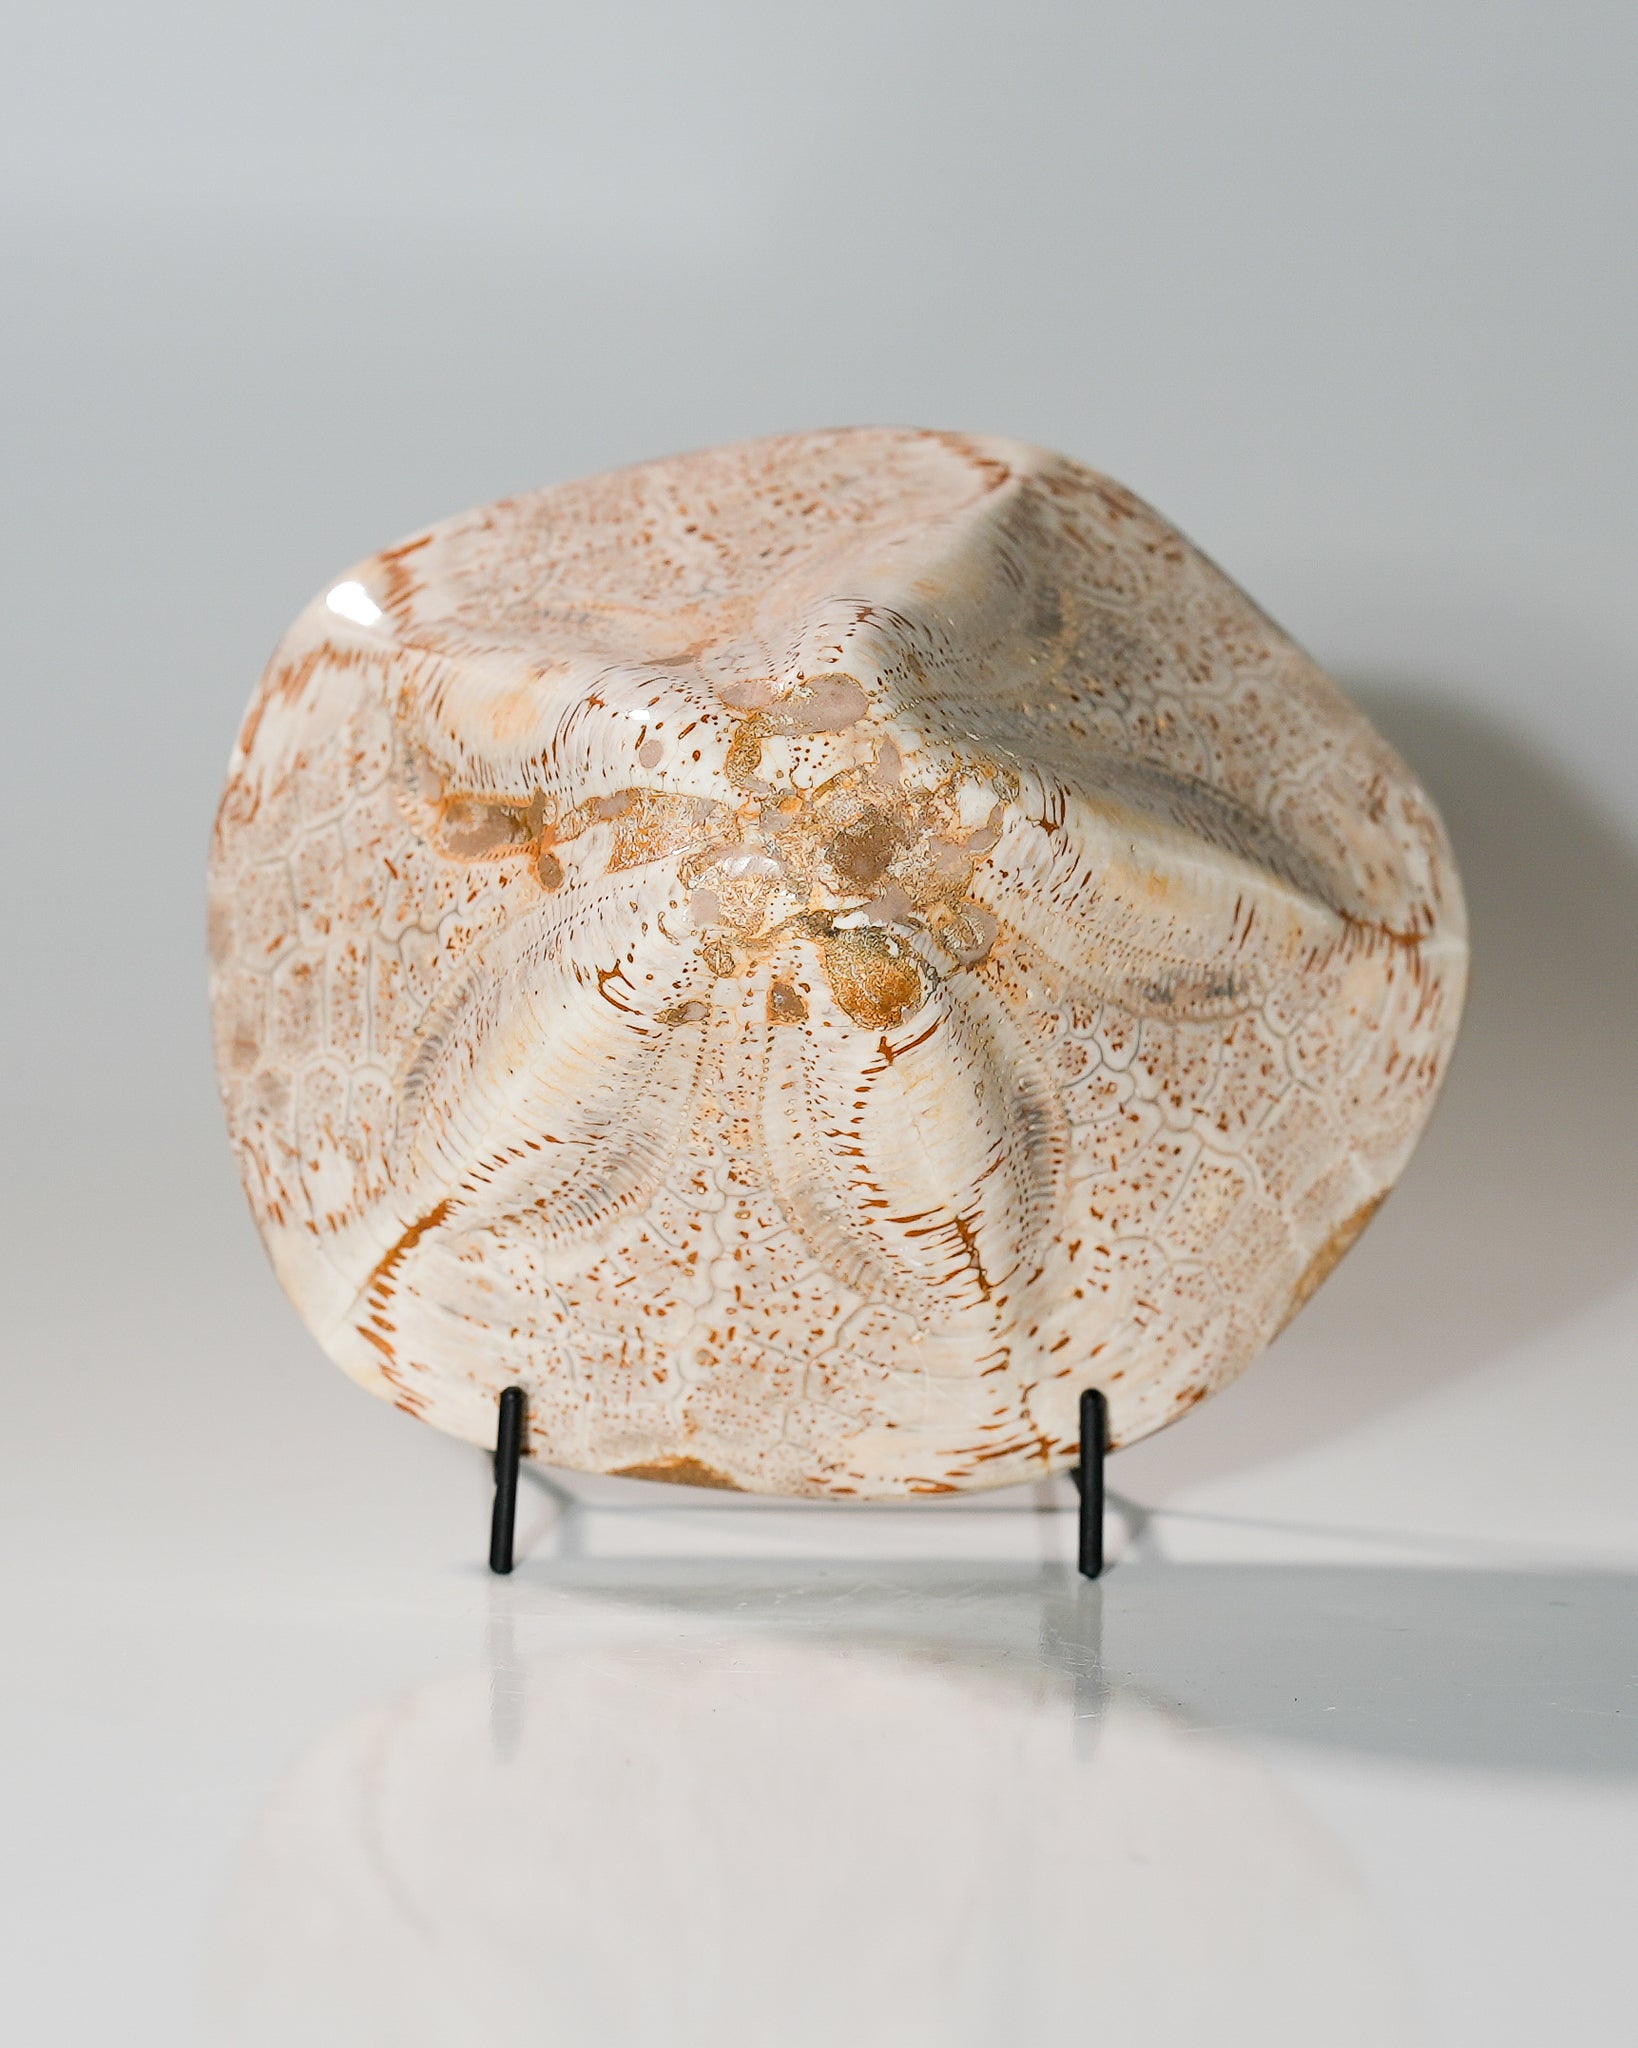 Fossilized Moroccan Miocene Echinoid Clypeaster